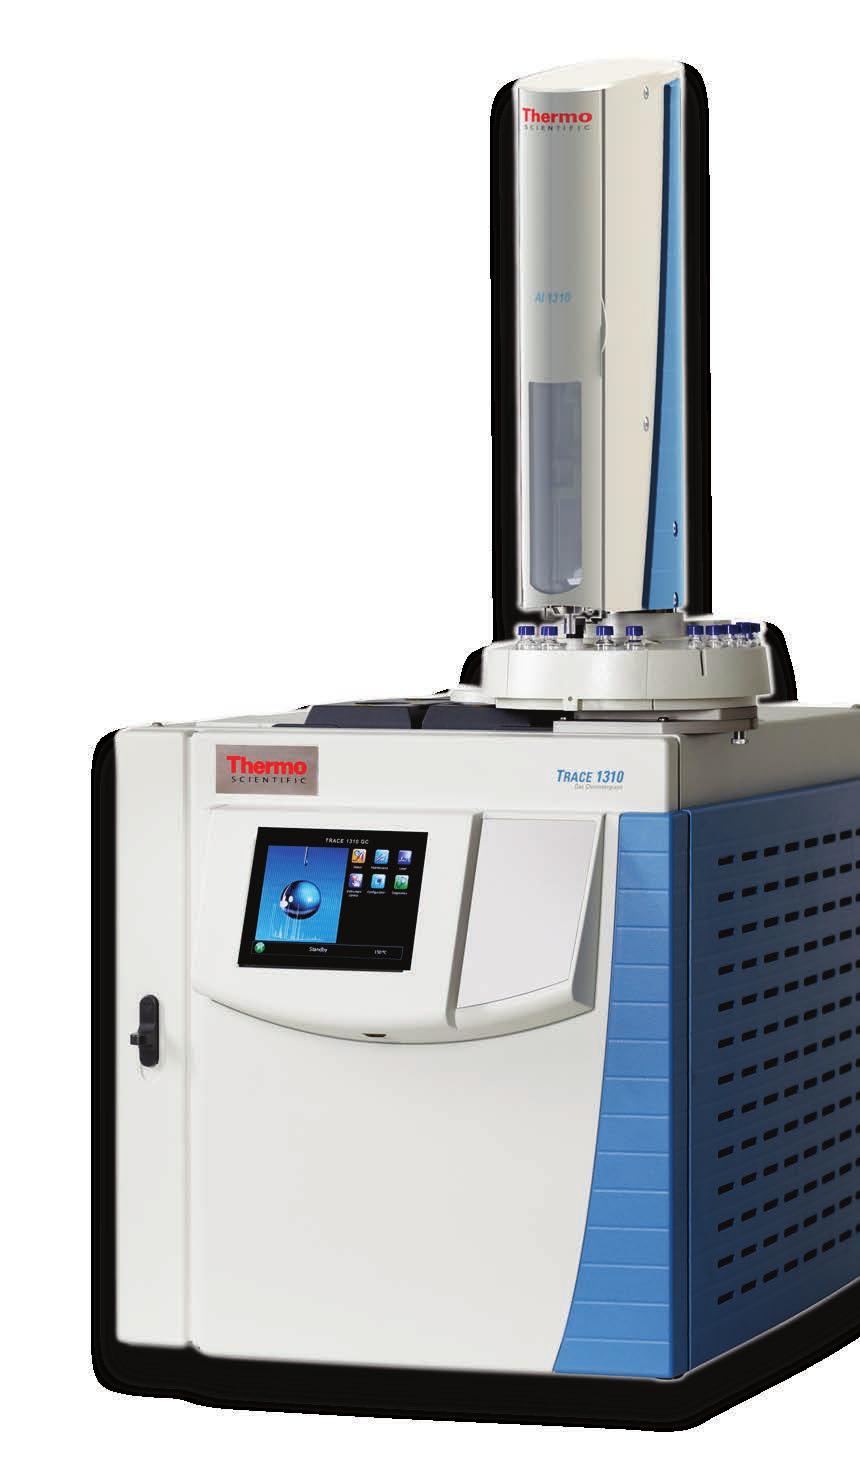 The Thermo Scientific TRACE 1300 Series Gas Chromatograph is the latest technology to simplify workflow and increase analytical performance in QA/QC and routine laboratories.